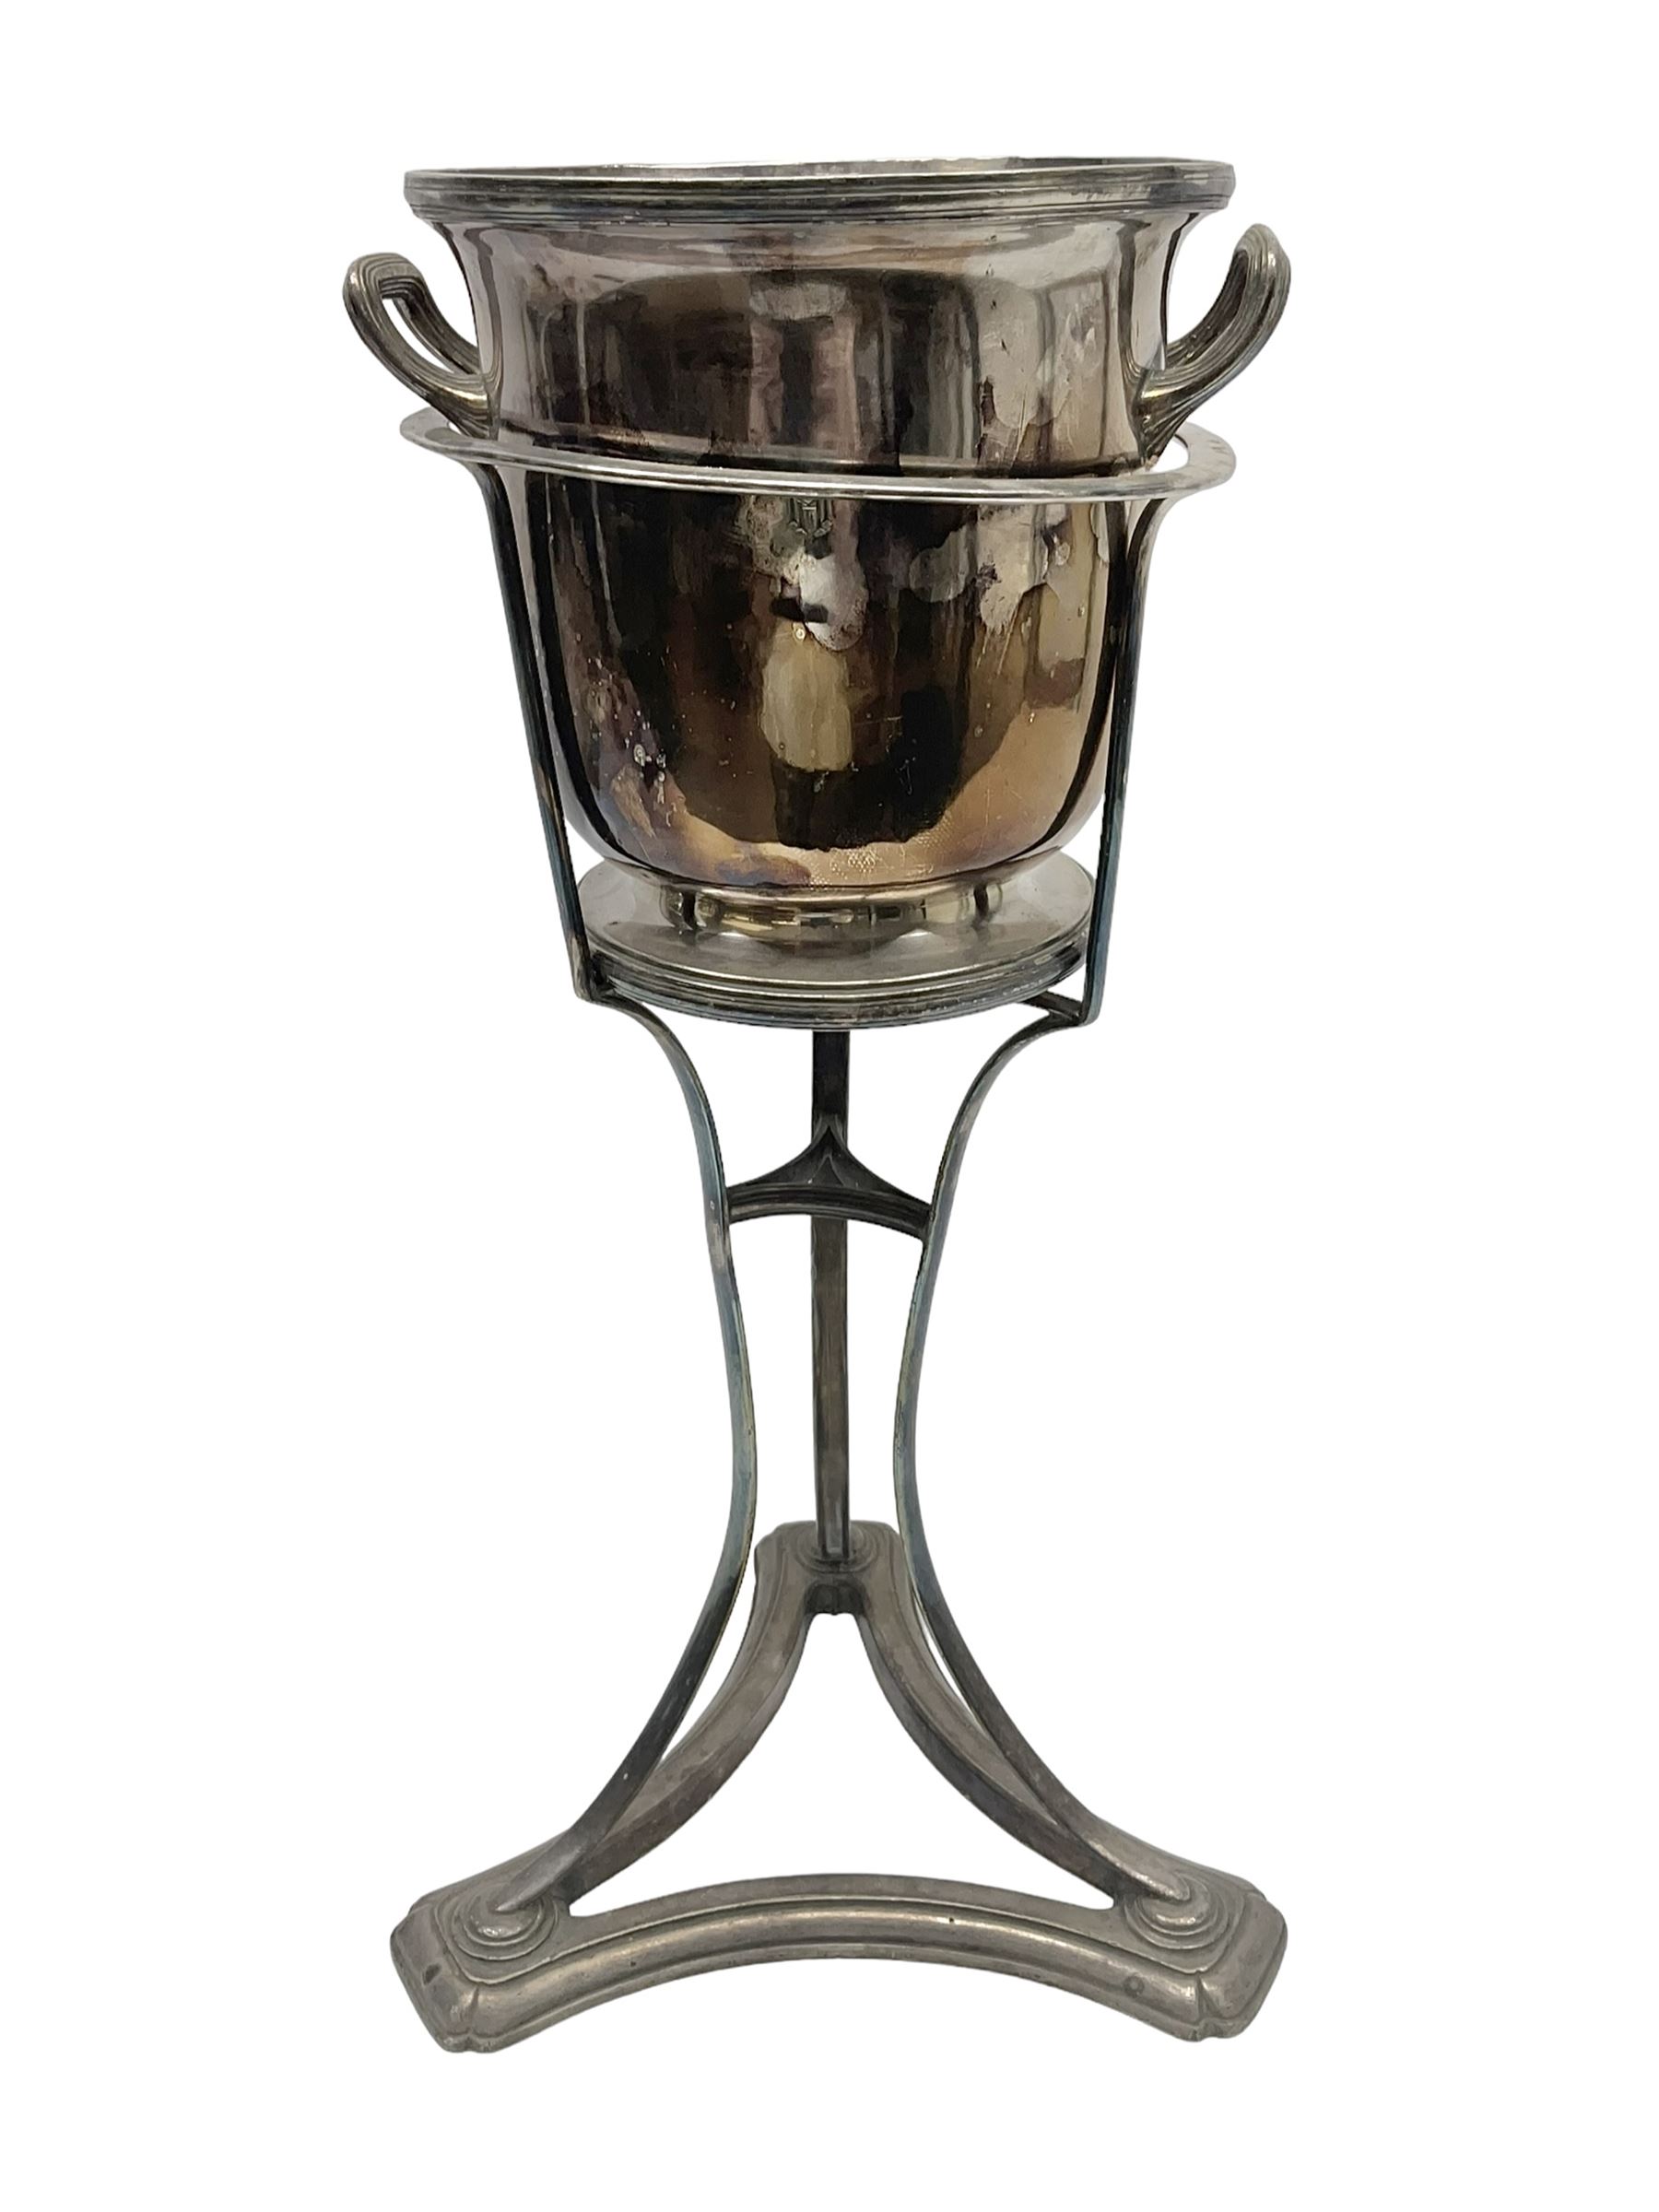 19th century Elkington & Co silver plated twin handled wine cooler and stand